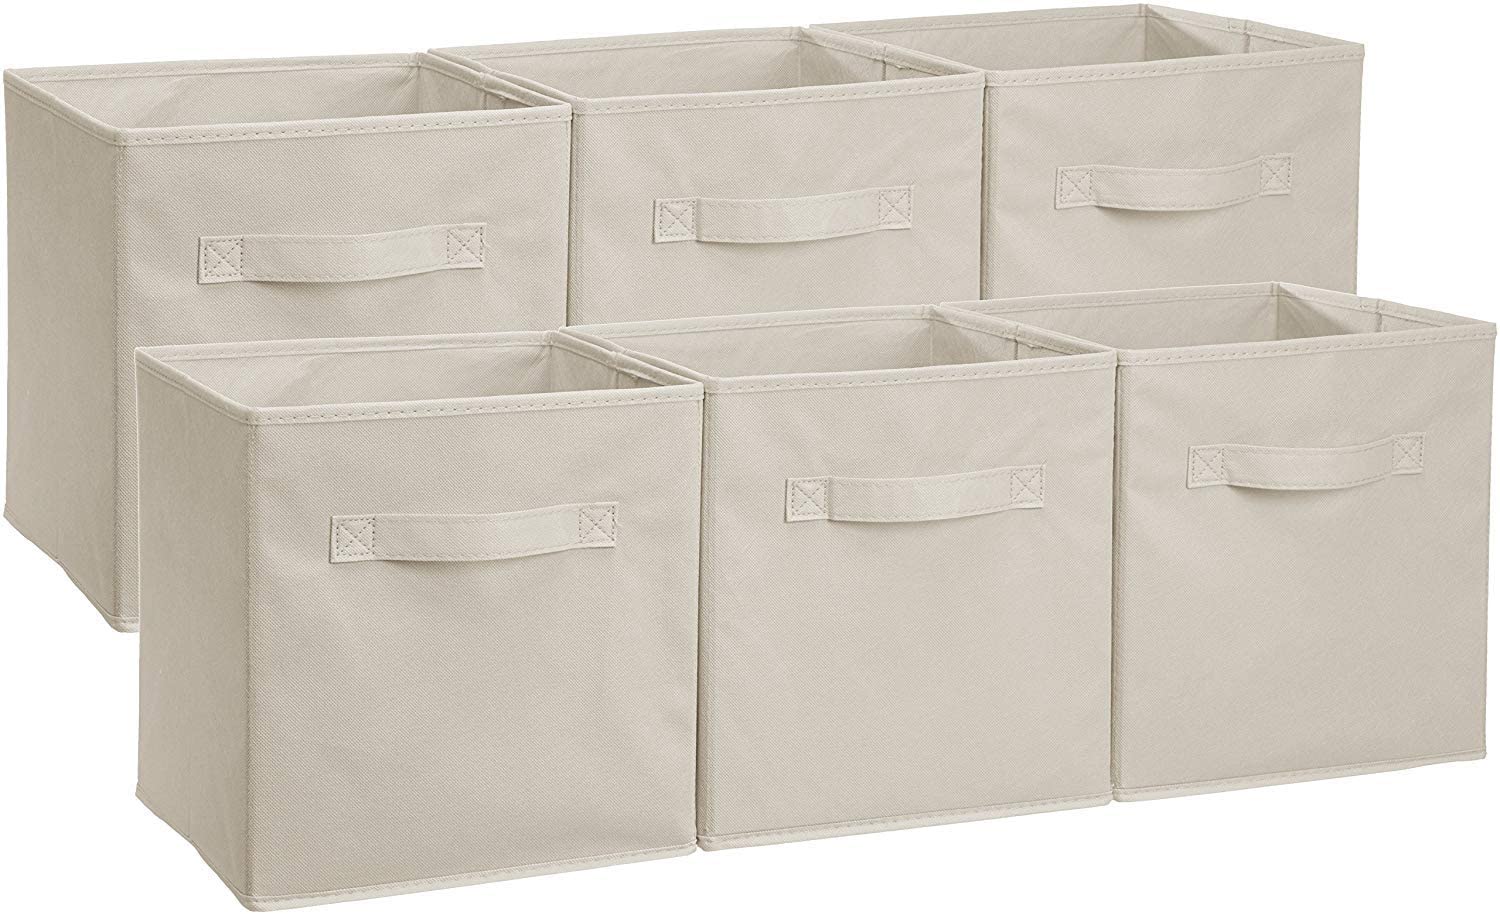 SUGIFT Collapsible Fabric Cube Storage Bins Cloth Baskets Set of 6